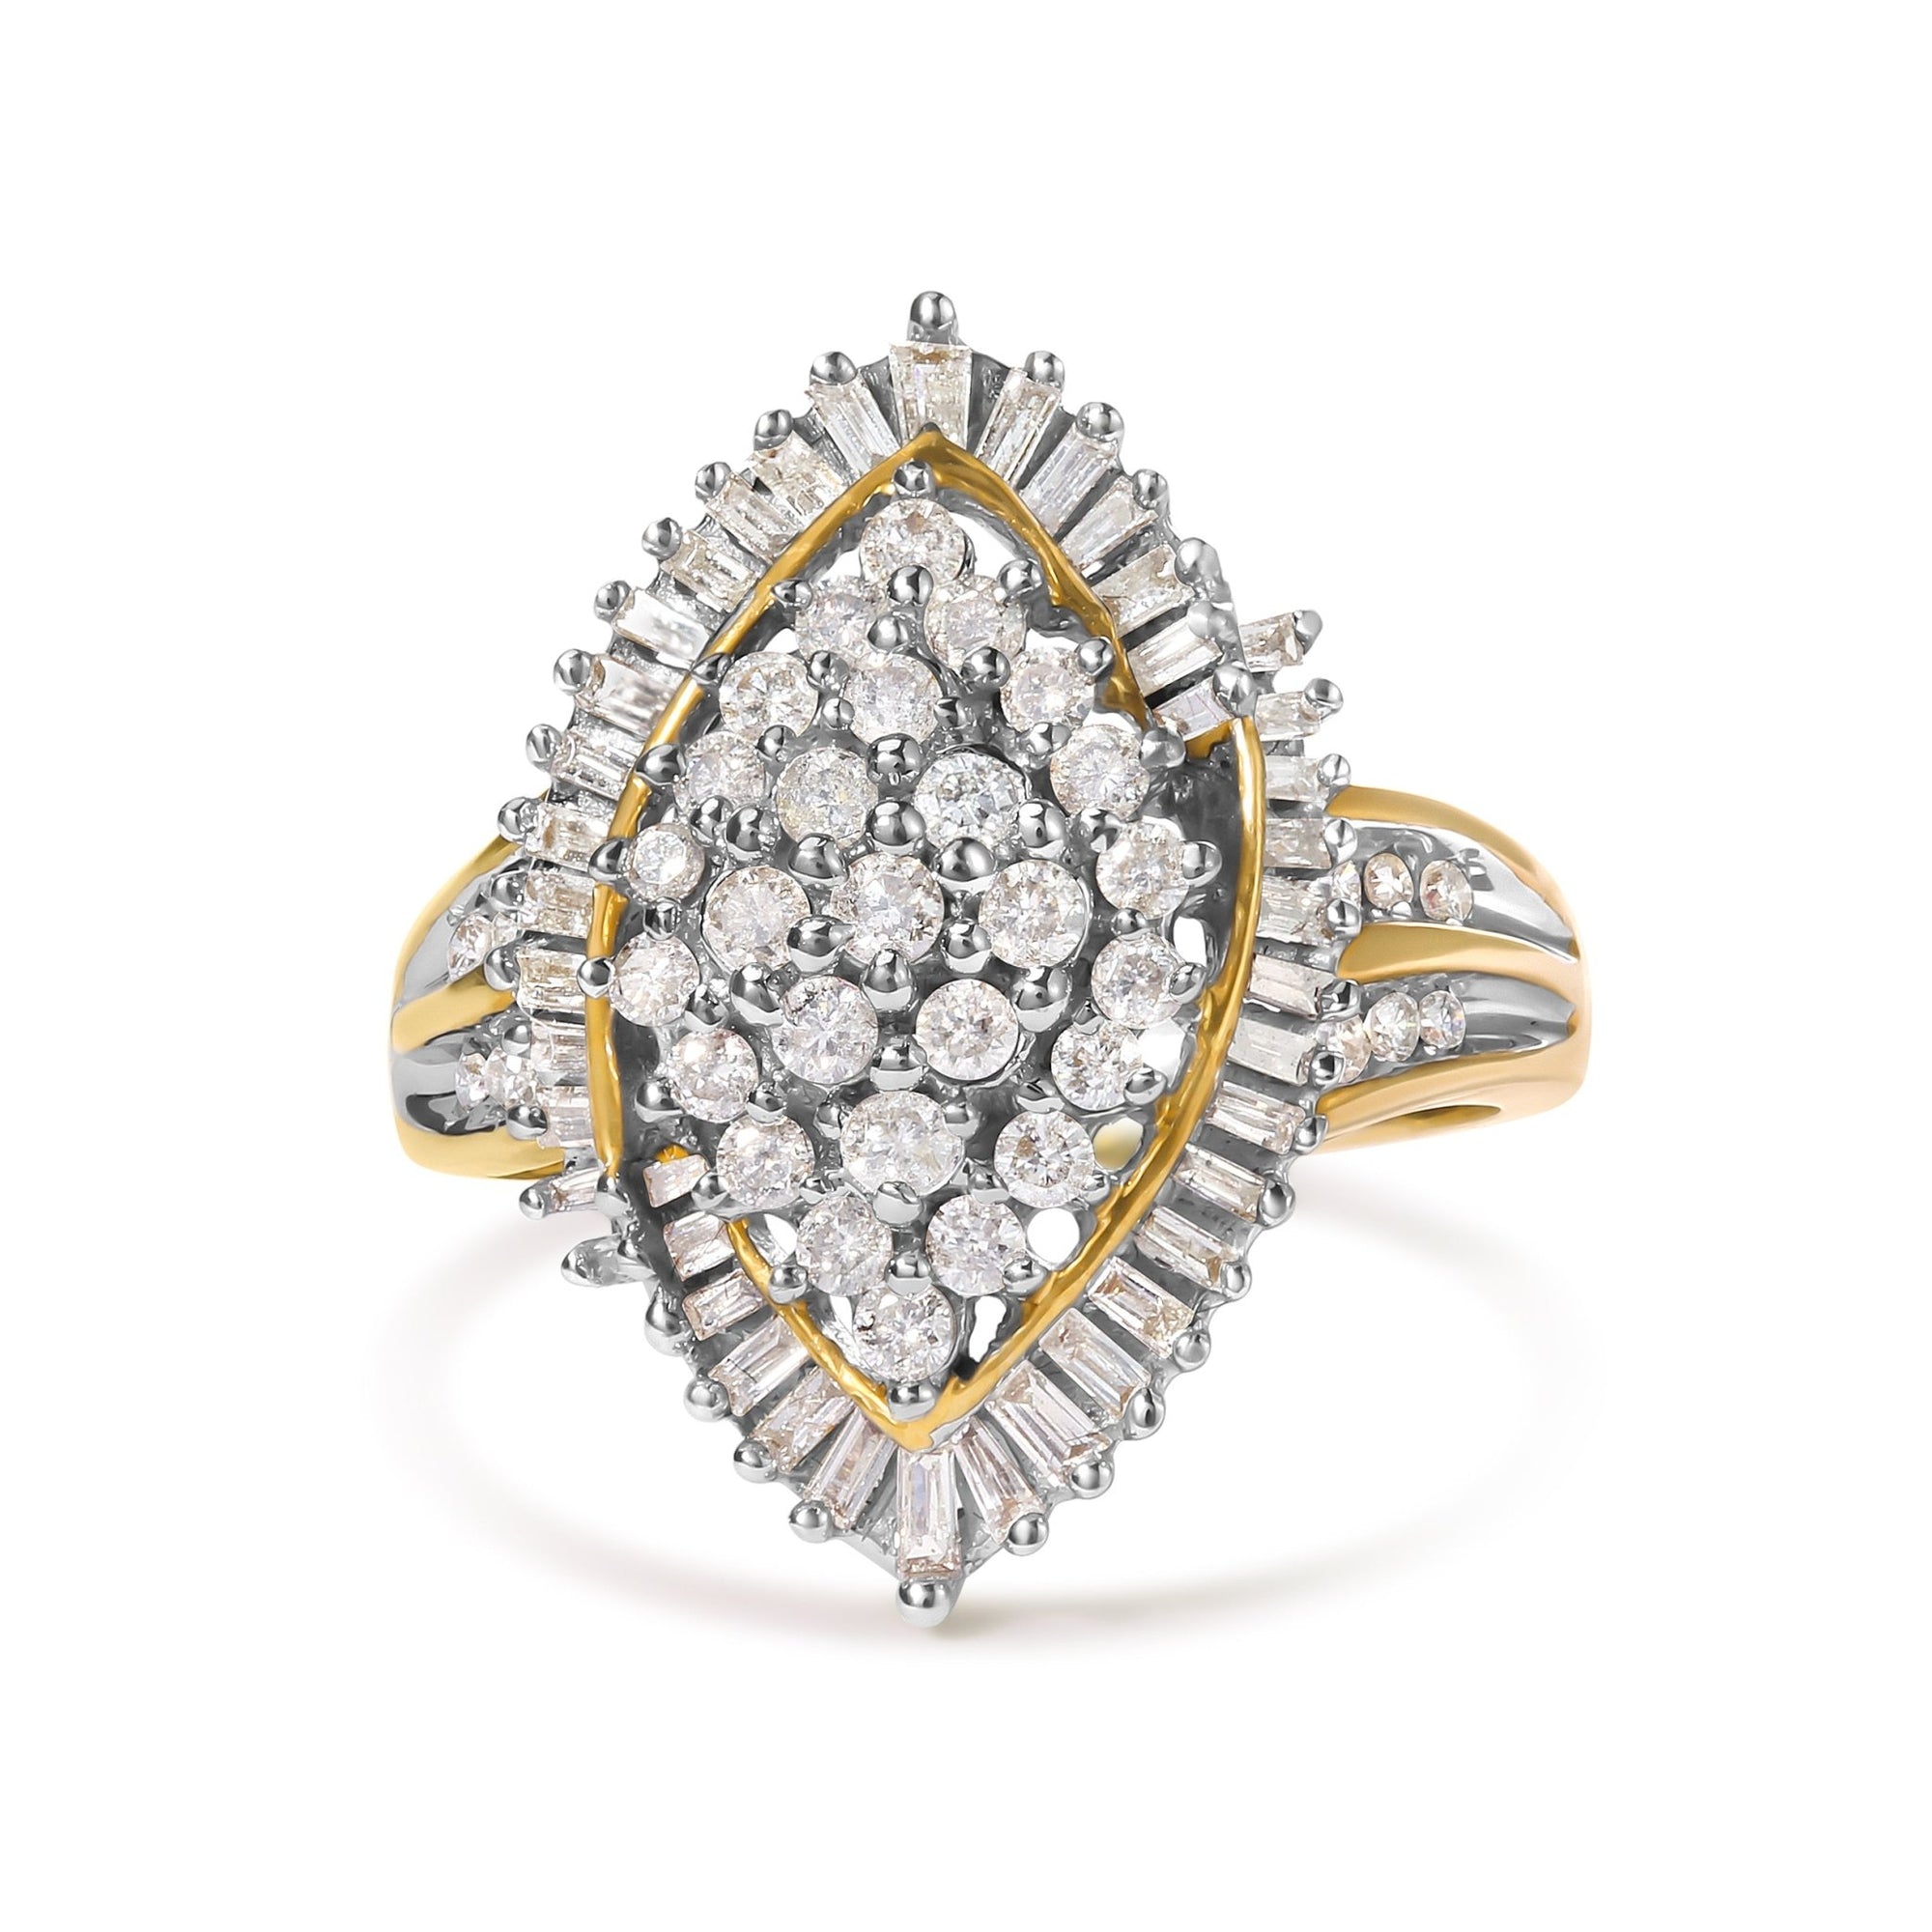 10K Yellow Gold 1.0 Cttw Round and Baguette-Cut Diamond Cluster Ring (I-J Color, SI2-I1 Clarity) - Size 7 - LinkagejewelrydesignLinkagejewelrydesign